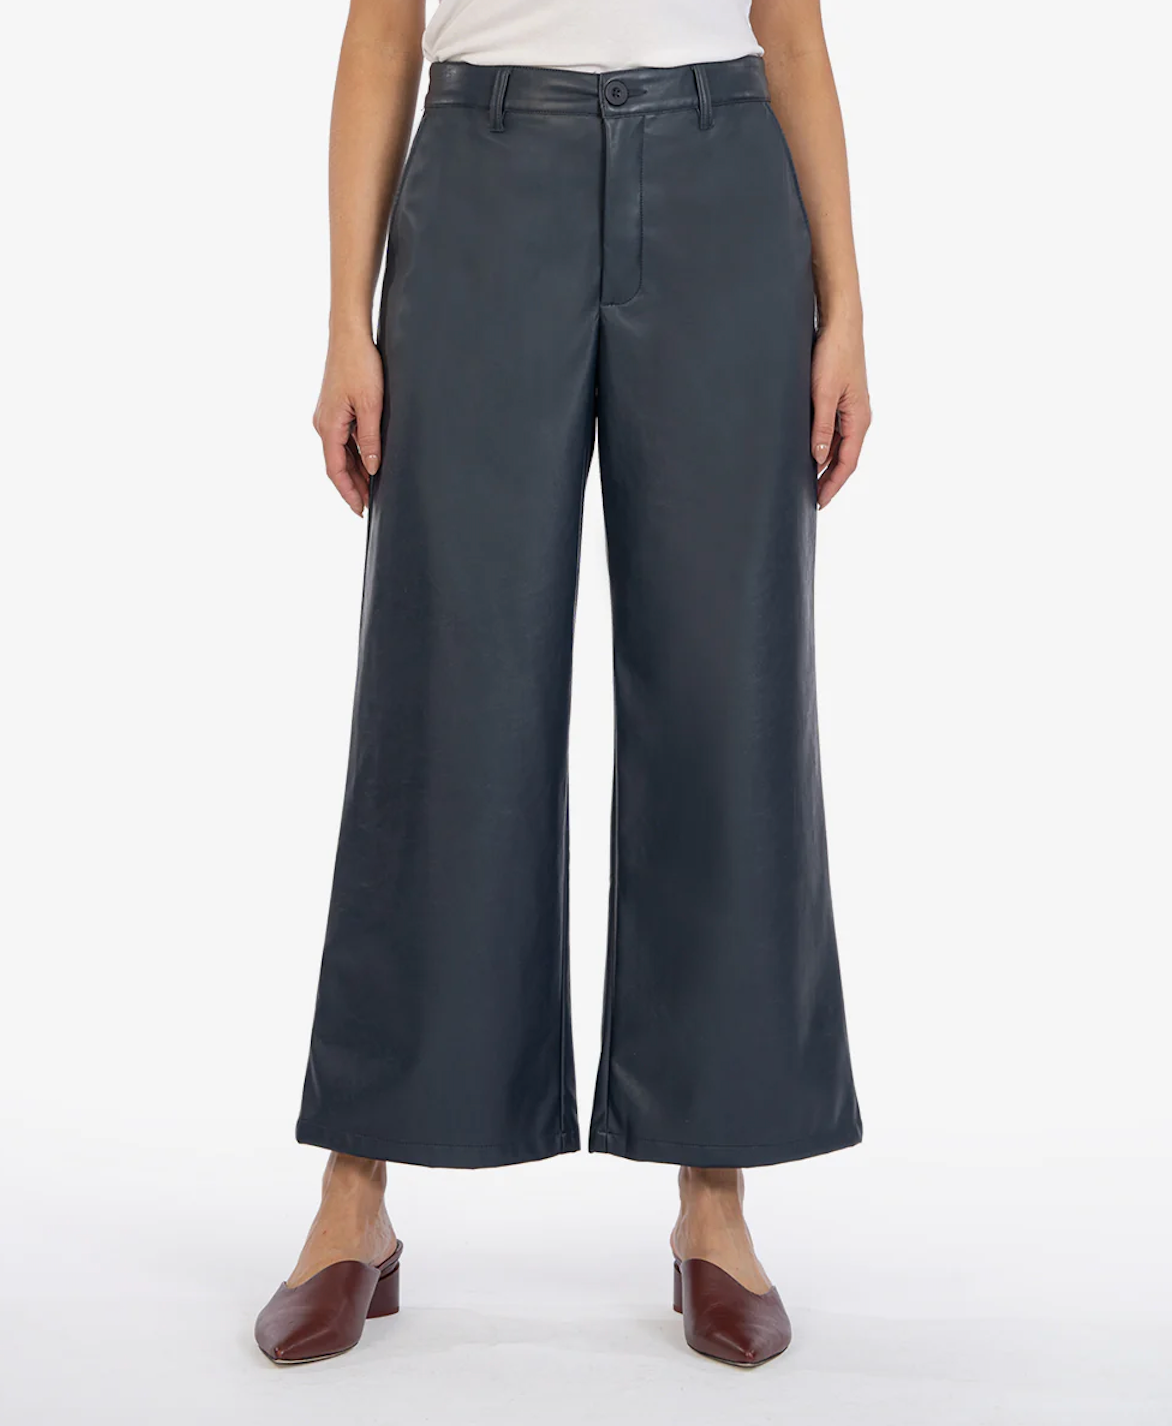 KUT FROM THE KLOTH AUBRIELLE HIGH RISE WIDE LEG COATED TROUSER IN NAVY